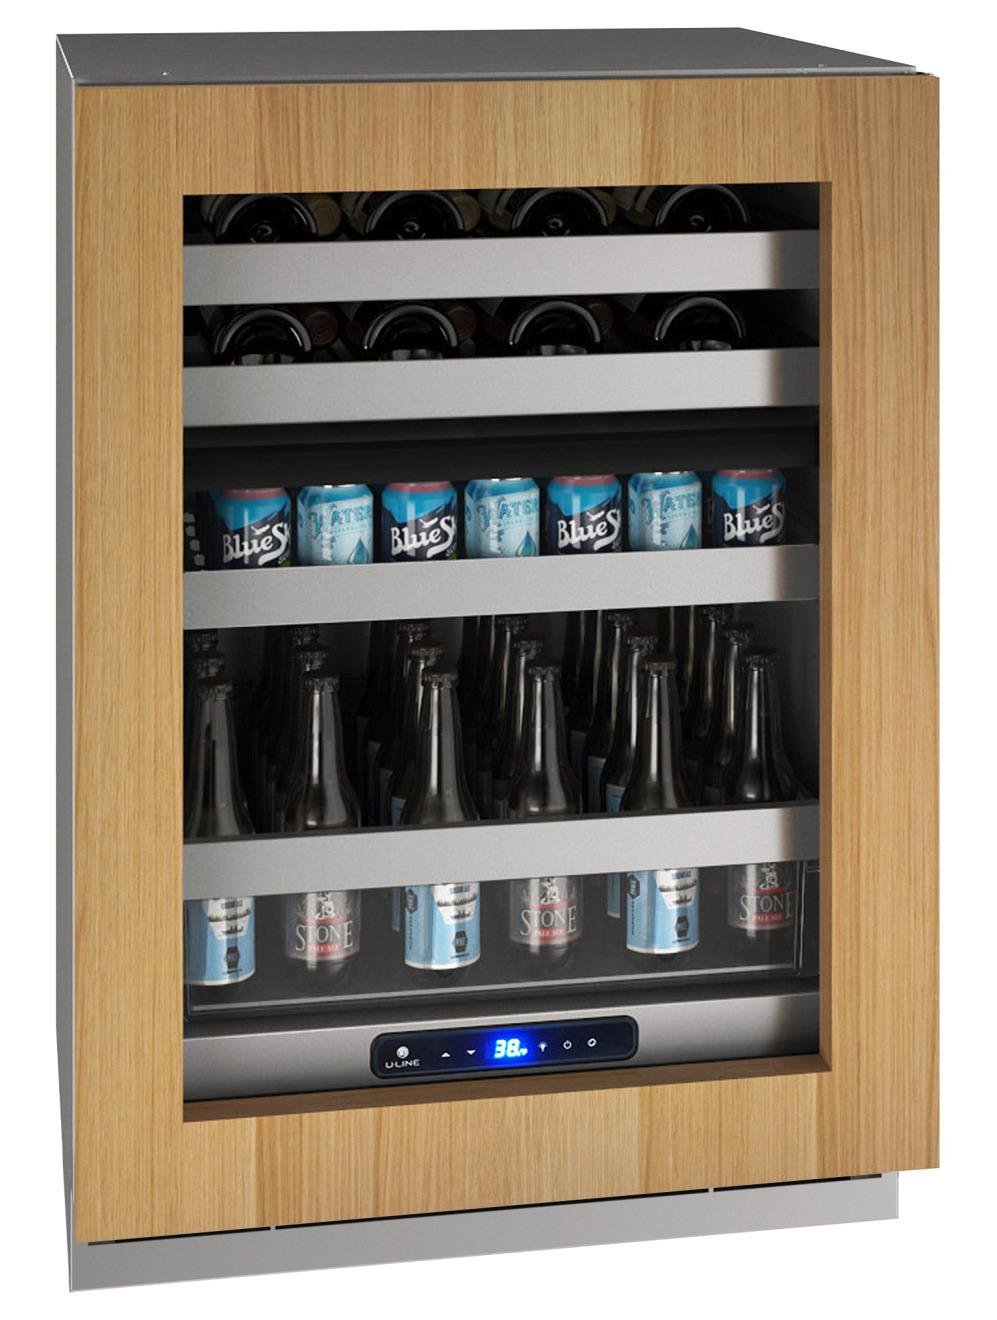 U-Line 24" Dual-zone Beverage Center With Integrated Frame Finish and Field Reversible Door Swing (115 V/60 Hz Volts /60 Hz Hz)